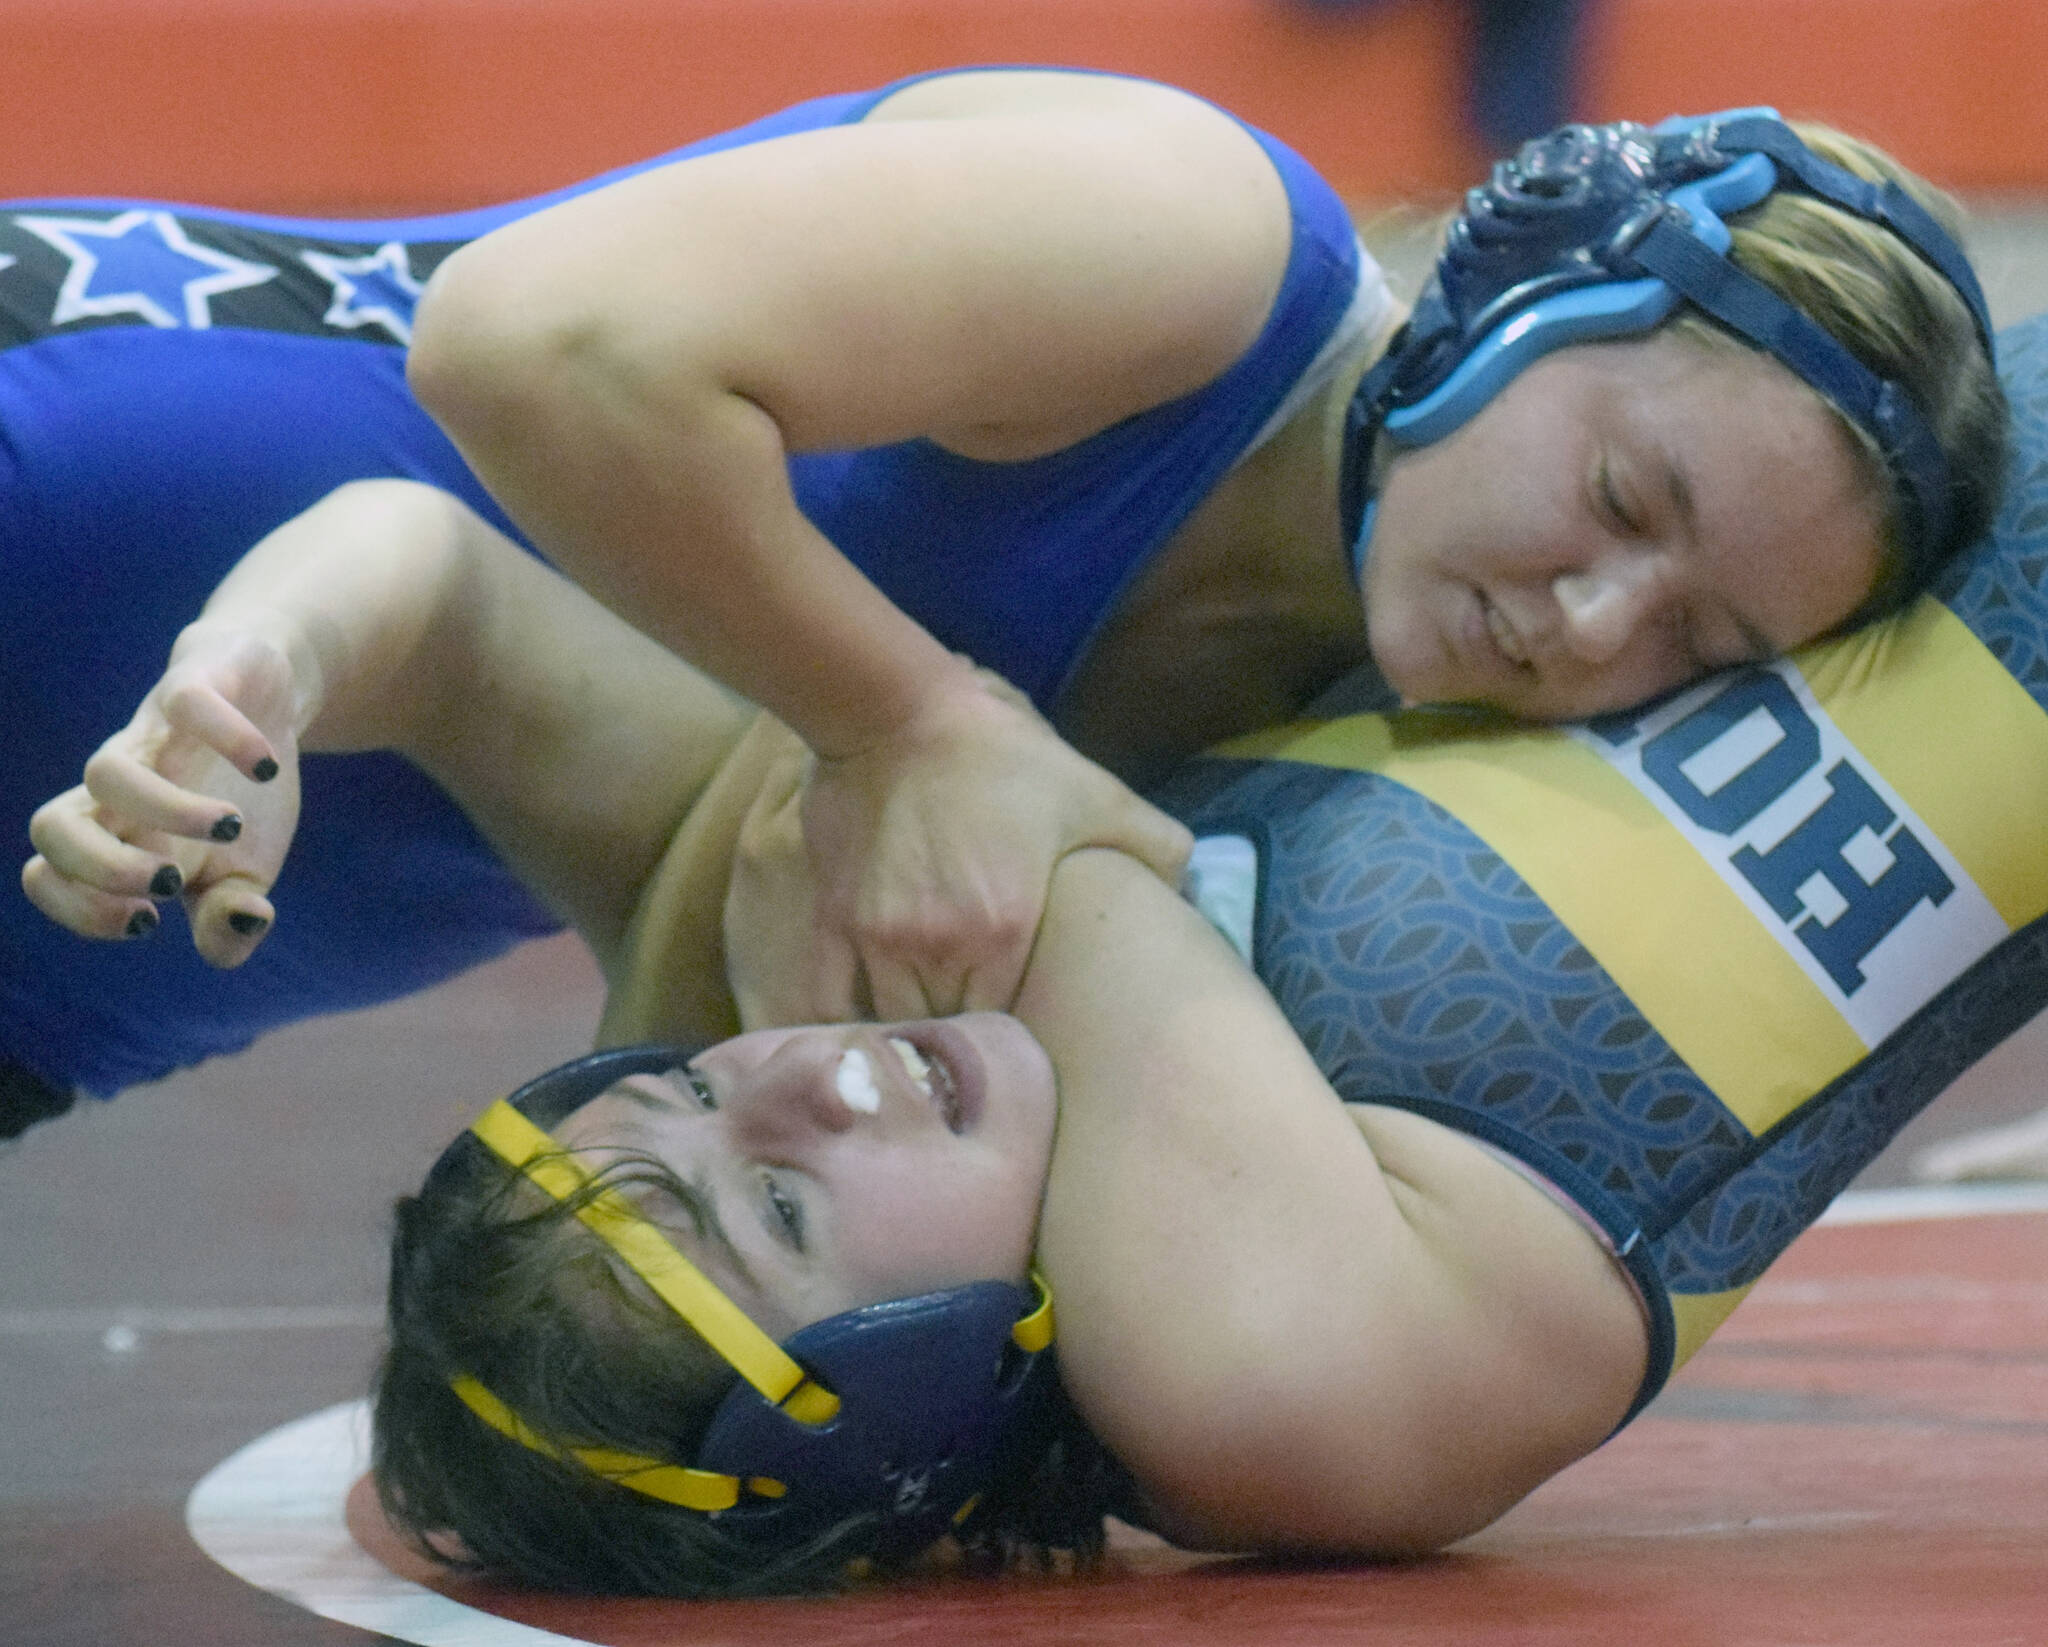 Soldotna’s Daisy Hannevold works her way to a pin of Homer’s Rainey Sundheim at the Luke Spruill Memorial Tournament on Saturday, Oct. 23, 2021, at Kenai Central High School in Kenai, Alaska. Hannevold was second at 145 for the girls, while Sundheim was sixth. (Photo by Jeff Helminiak/Peninsula Clarion)